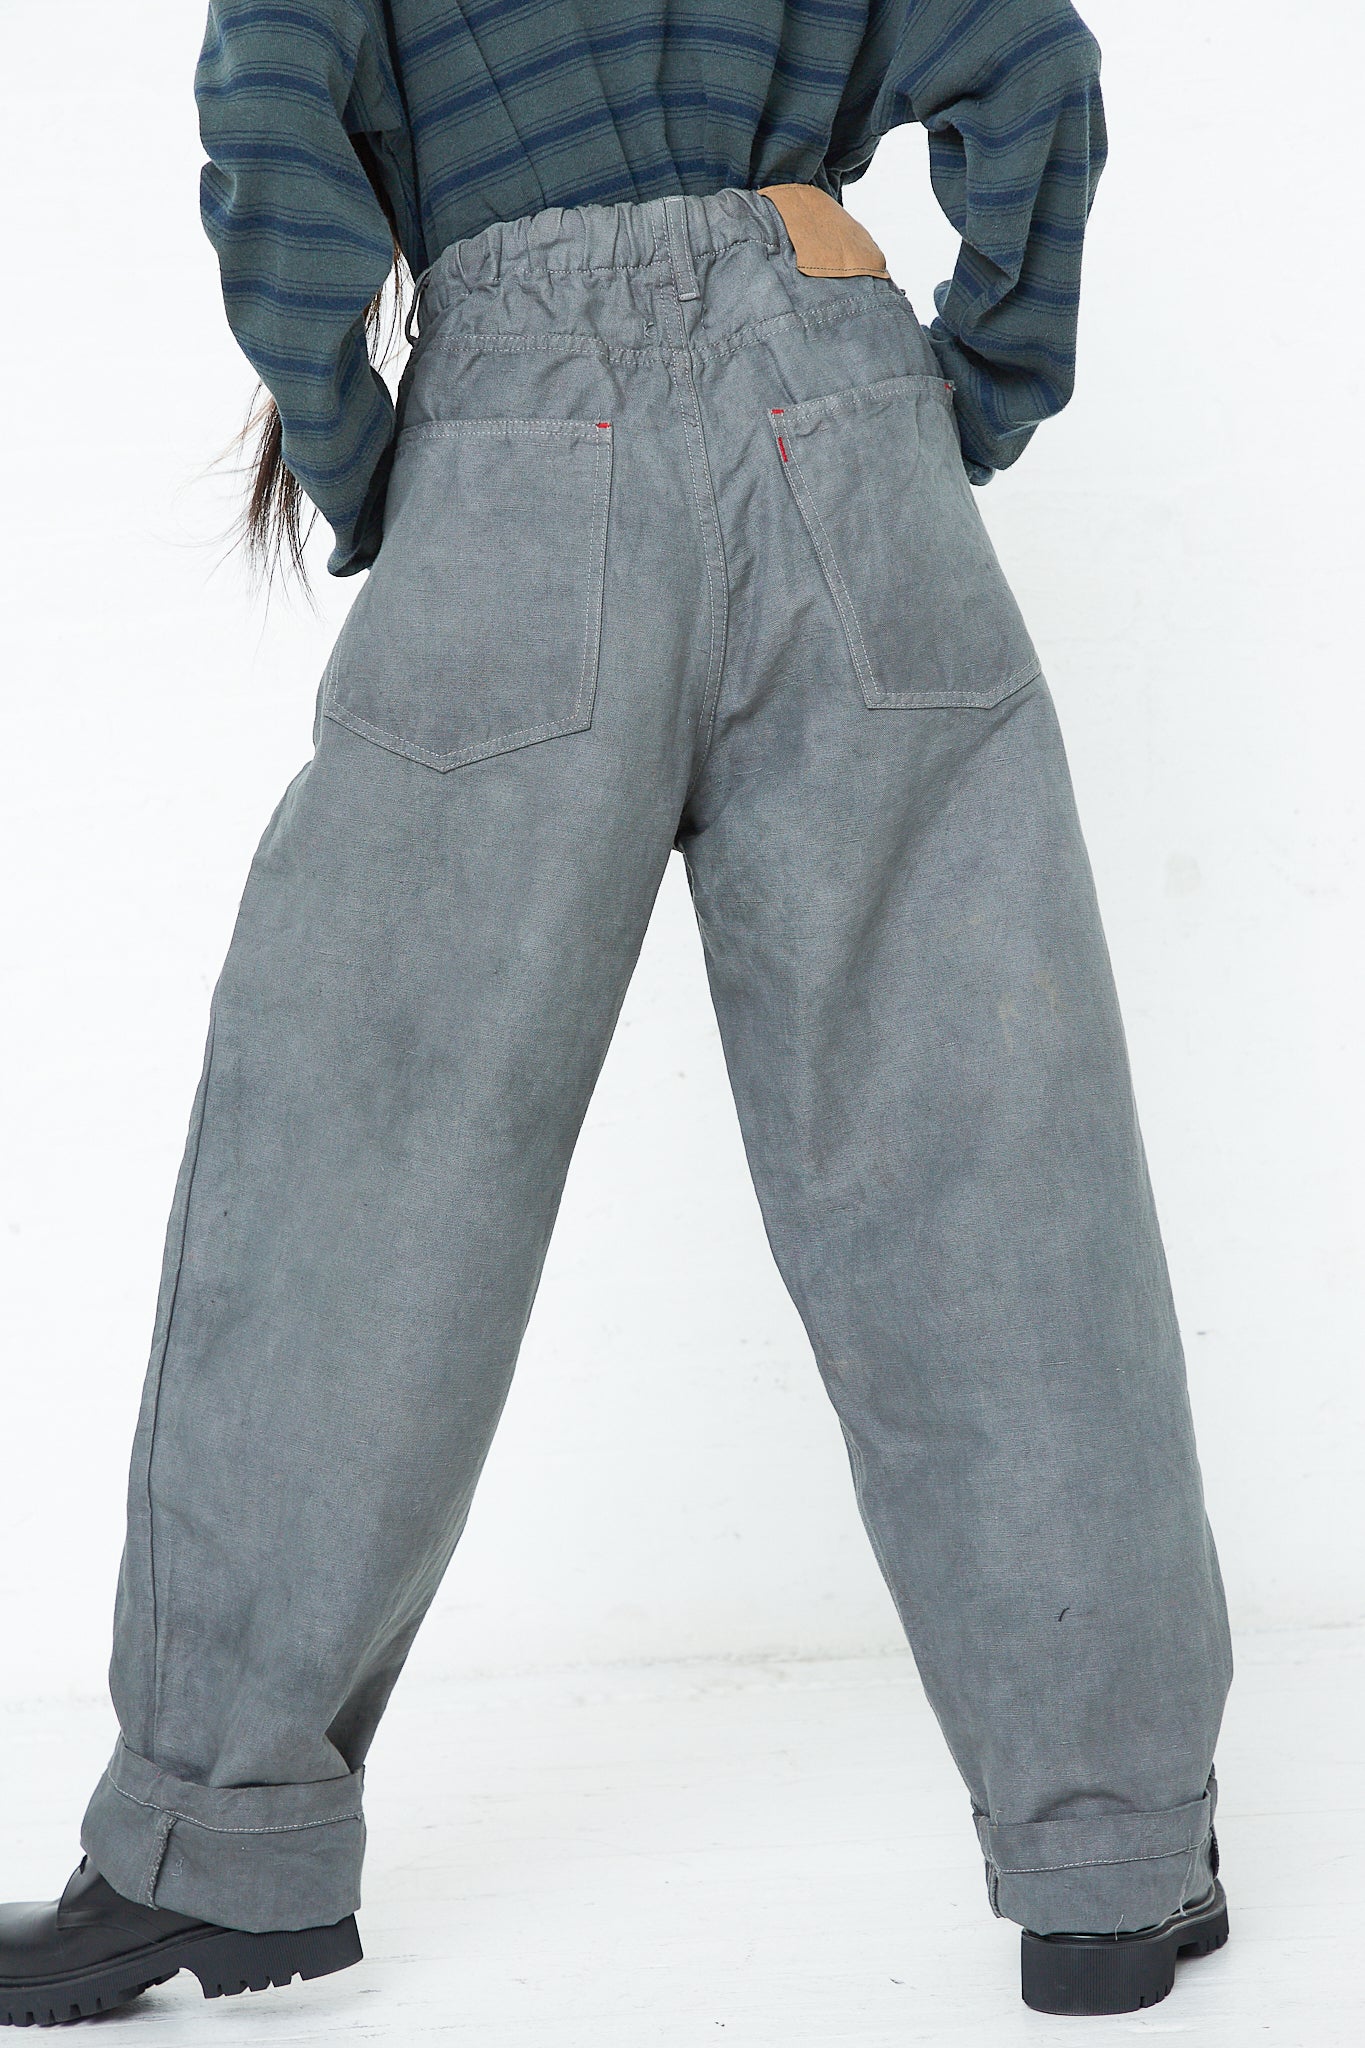 A woman is standing with her back to the camera in a pair of relaxed fit pants made from 9 oz. Cotton and Hemp P40 Z Boys Military Pant in Swiss Army by Dr. Collectors.